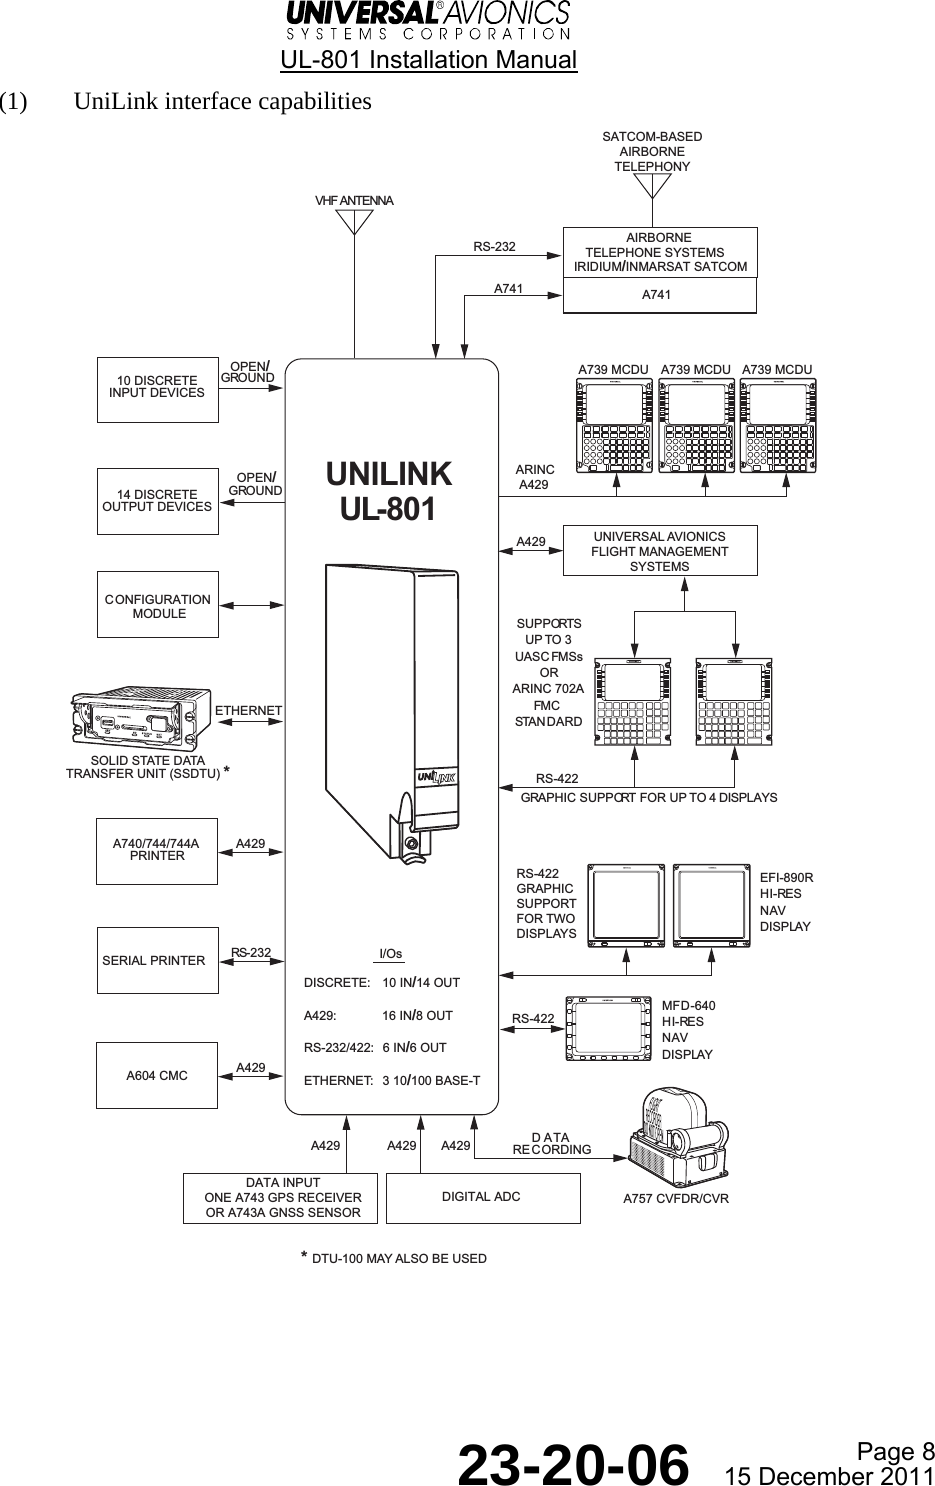  UL-801 Installation Manual  Page 8  23-20-06  15 December 2011 (1) UniLink interface capabilities  10 DISCRETEINPUT DEVICES14 DISCRETEOUTPUT DEVICESCONFIGURATIONMODULEA740/744/744APRINTERSERIAL PRINTERA604 CMCRS-232OPEN/GROUNDOPEN/GROUNDA739 MCDUAIRBORNETELEPHONE SYSTEMSIRIDIUM/INMARSAT SATCOMEFI-890RHI-RES NAV DISPLAYMFD-640HI-RES NAV DISPLAYGRAPHIC SUPPORT FOR UP  TO 4 DISPLAYSSUPPORTSUP TO 3UASC FMSsORARINC 702AFMC STAN D A RDA429A429   ARINC    A429RS-232UNILINKUL-801ETHERNETI/OsDISCRETE: 10 IN/14 OUTA429: 16 IN/8 OUTRS-232/422: 6 IN/6 OUTETHERNET: 3 10/100 BASE-TA429RS-422A757 CVFDR/CVRDATARECORDINGDIGITAL ADC A429A429 A429DATA INPUTONE A743 GPS RECEIVEROR A743A GNSS SENSORRS-422UNIVERSAL AVIONICSFLIGHT MANAGEMENTSYSTEMSSOLID STATE DATATRANSFER UNIT (SSDTU) ** DTU-100 MAY ALSO BE USEDSATCOM-BASEDAIRBORNETELEPHONYA739 MCDU A739 MCDURS-422GRAPHICSUPPORTFOR TWODISPLAYSVHF ANTENNAA741 A741